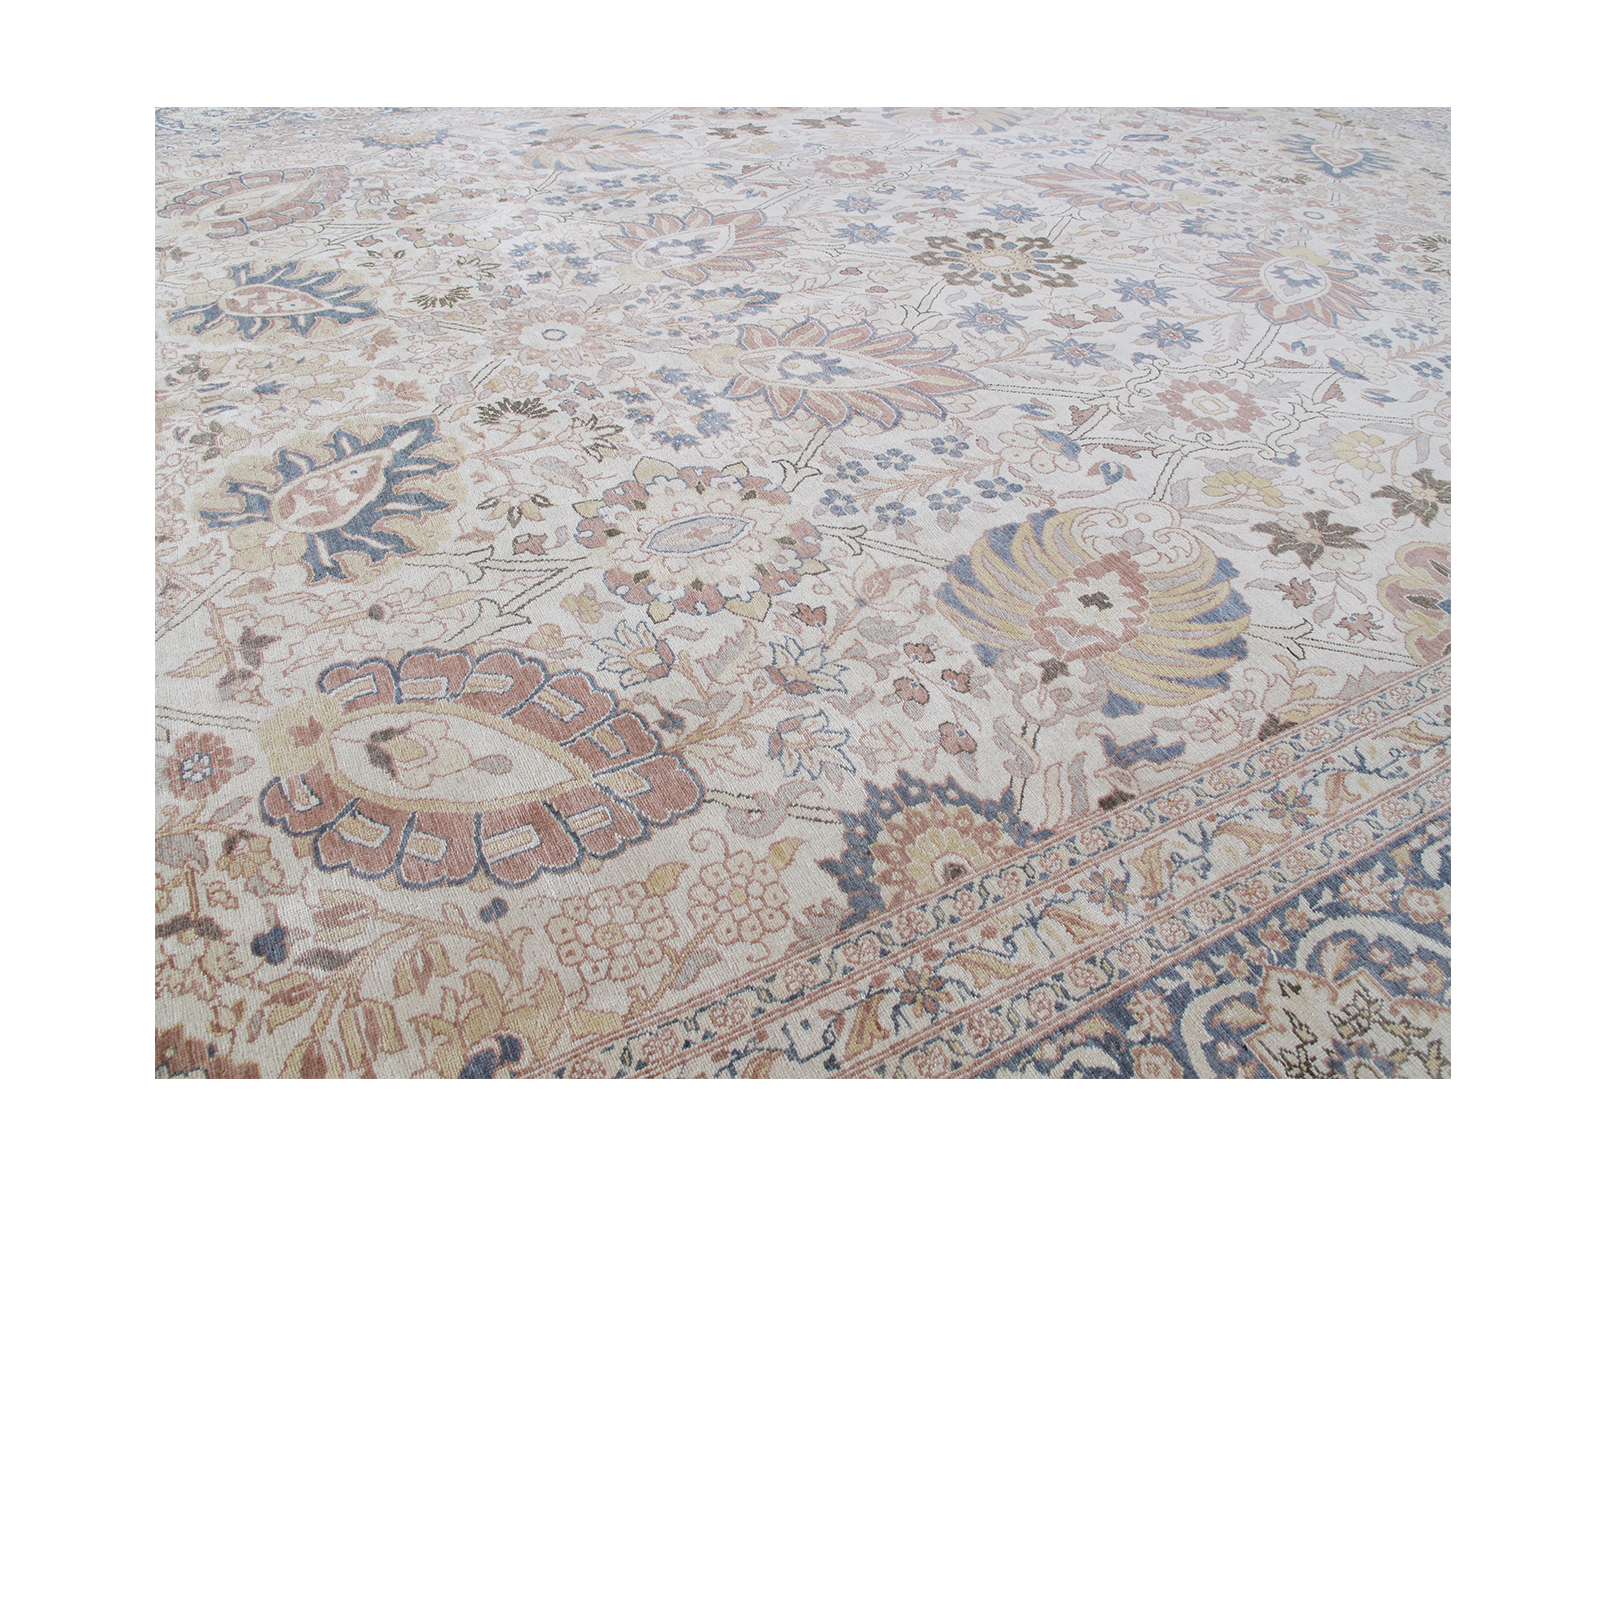 This Persian Tabriz rug is made of 100% wool.